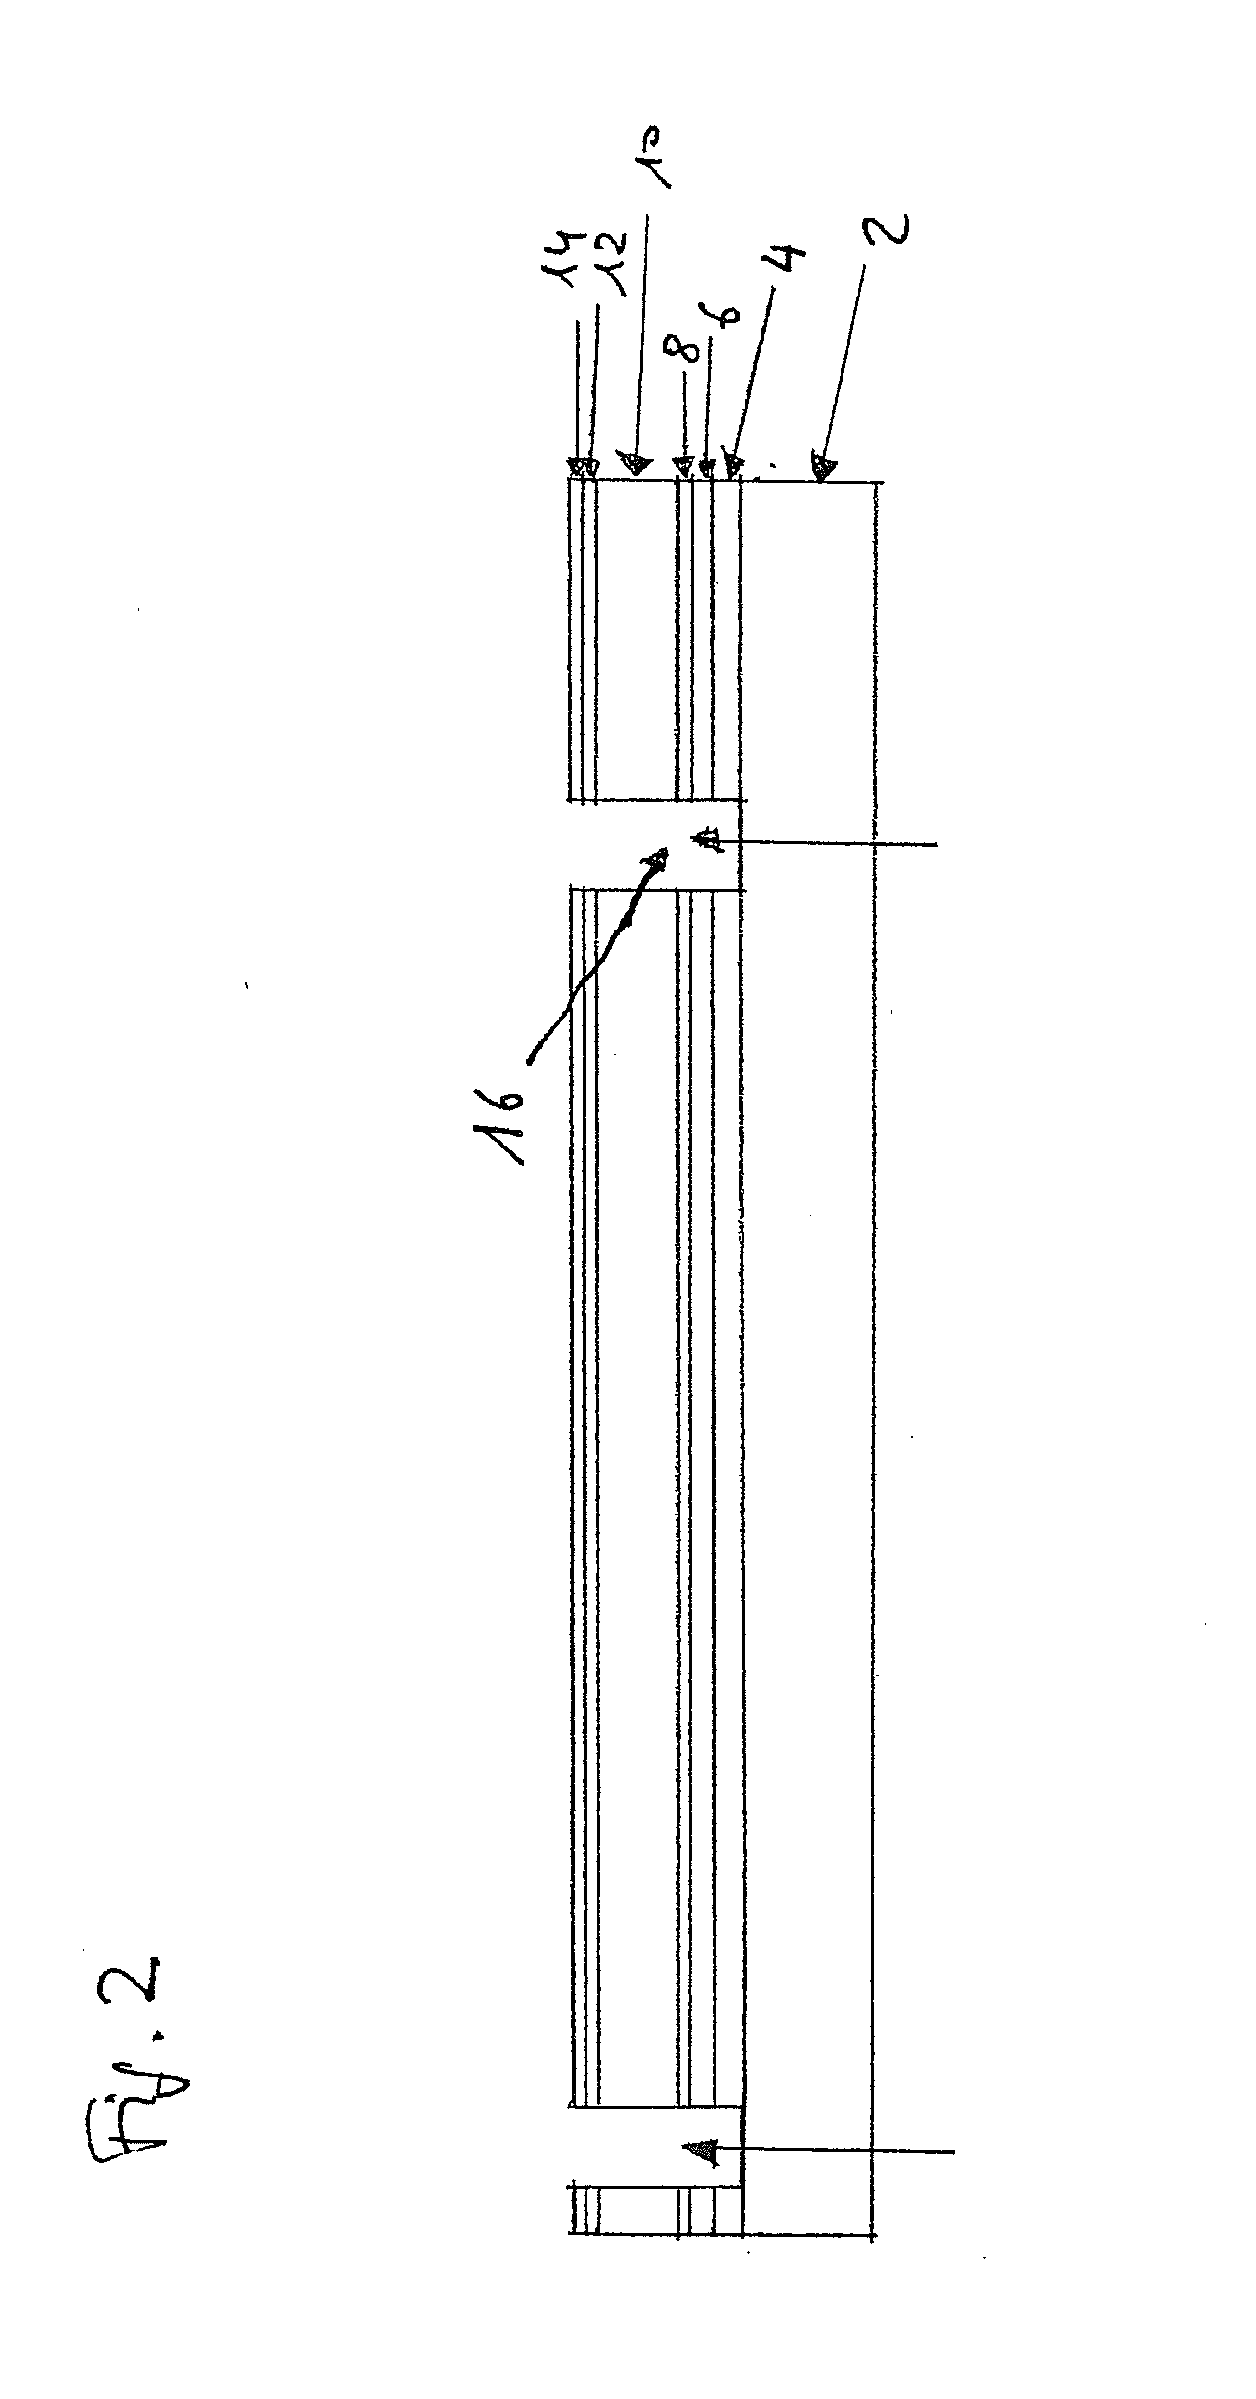 Method for manufacturing thin-film solar modules, and thin-film solar modules which are obtainable according to this method